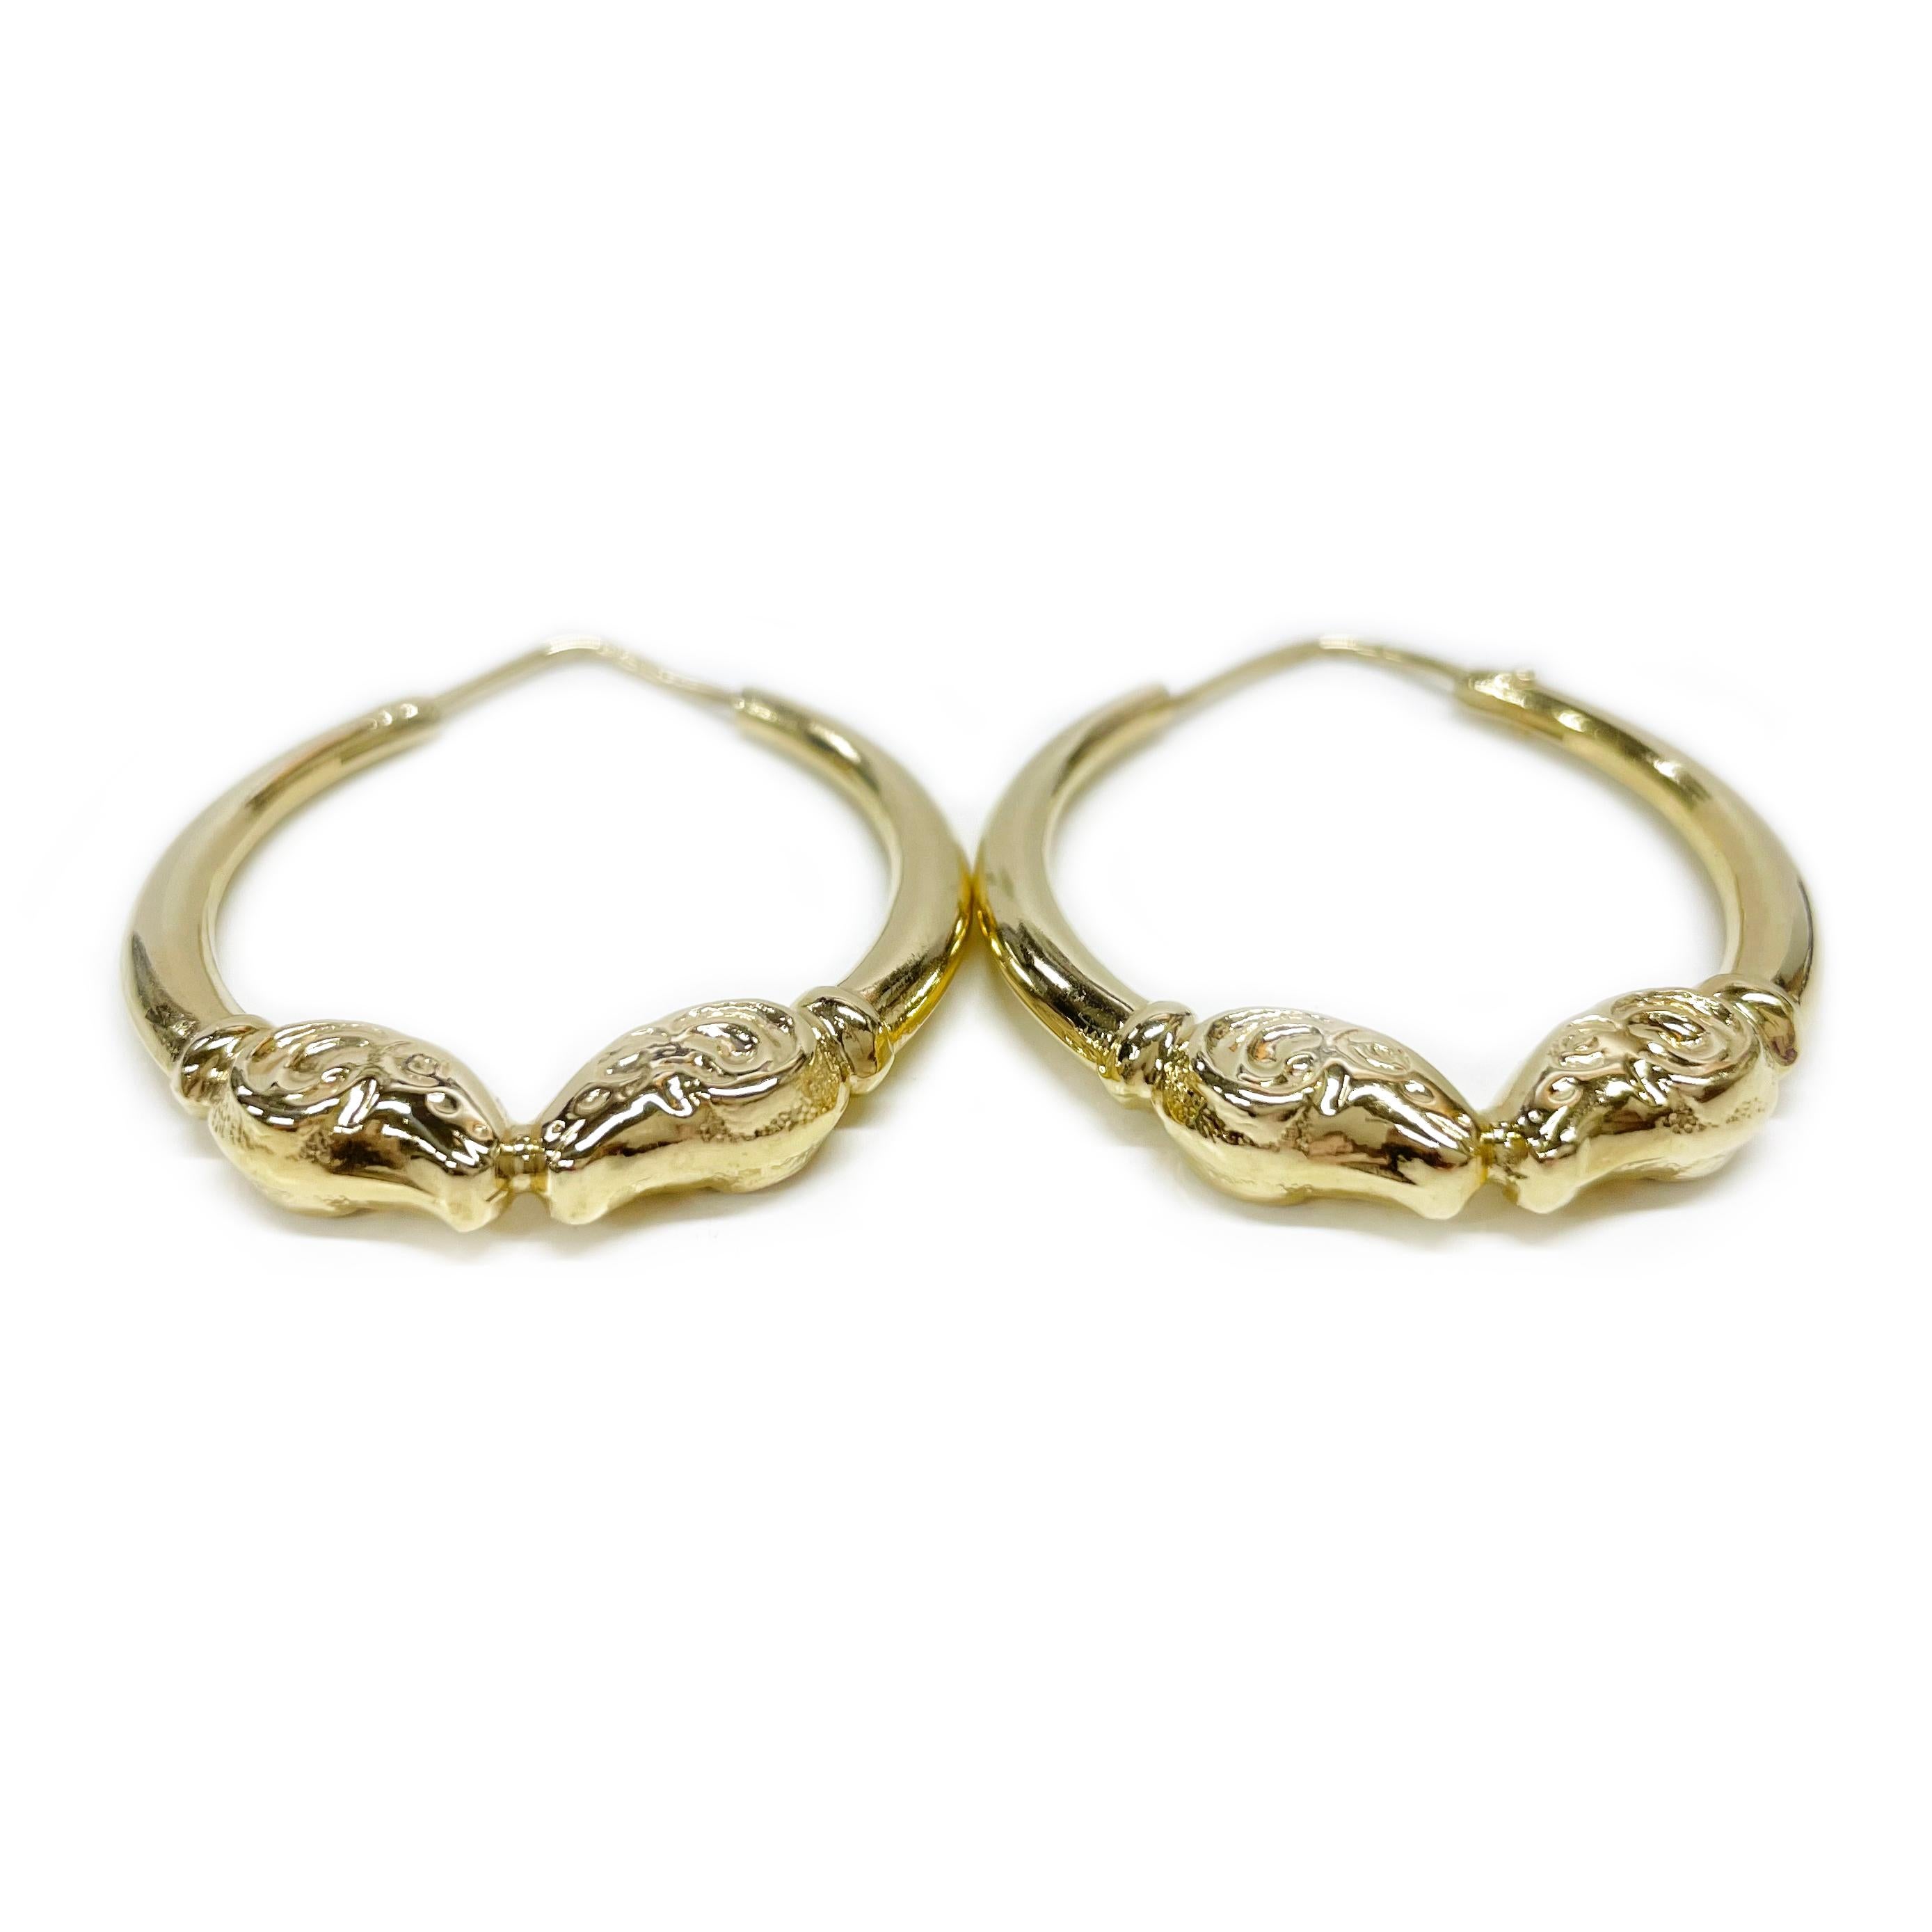 14 Karat Yellow Gold Ram Hoop Earrings. These lightweight hollow hoops feature facing dual ram heads at the bottom with an overall smooth shiny finish. The earrings measure 33.3 in diameter. The earrings have a hoop wire closure with 14KT stamped on